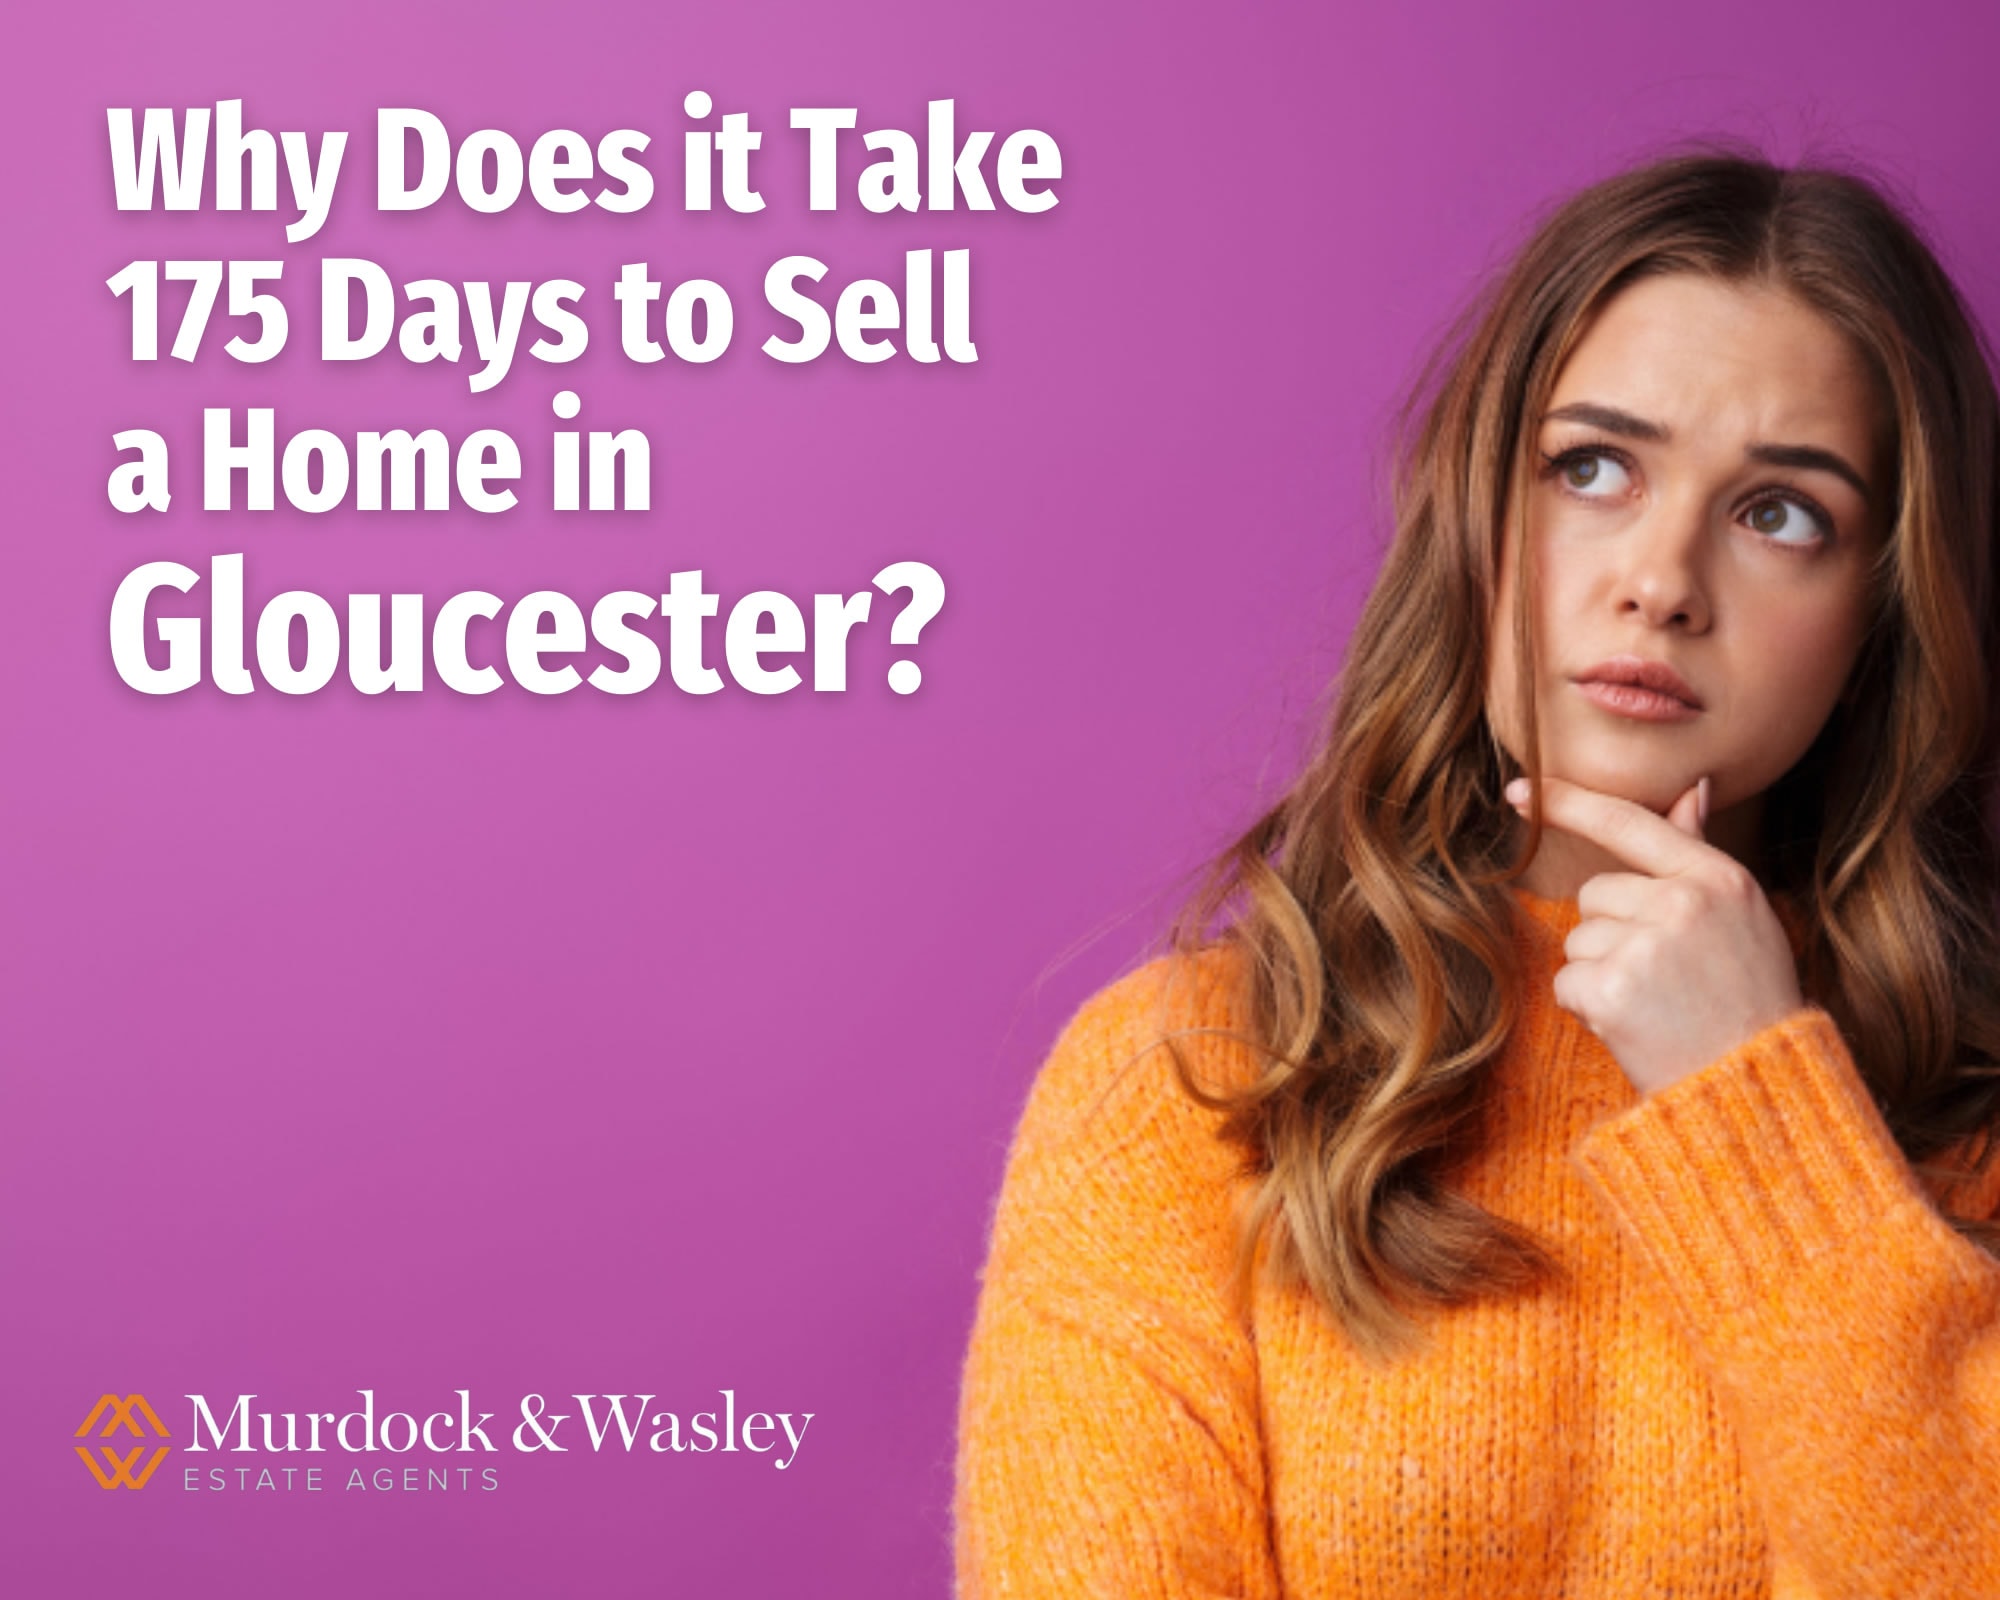 Why Does it Take 175 Days to Sell a Home in Gloucester? 